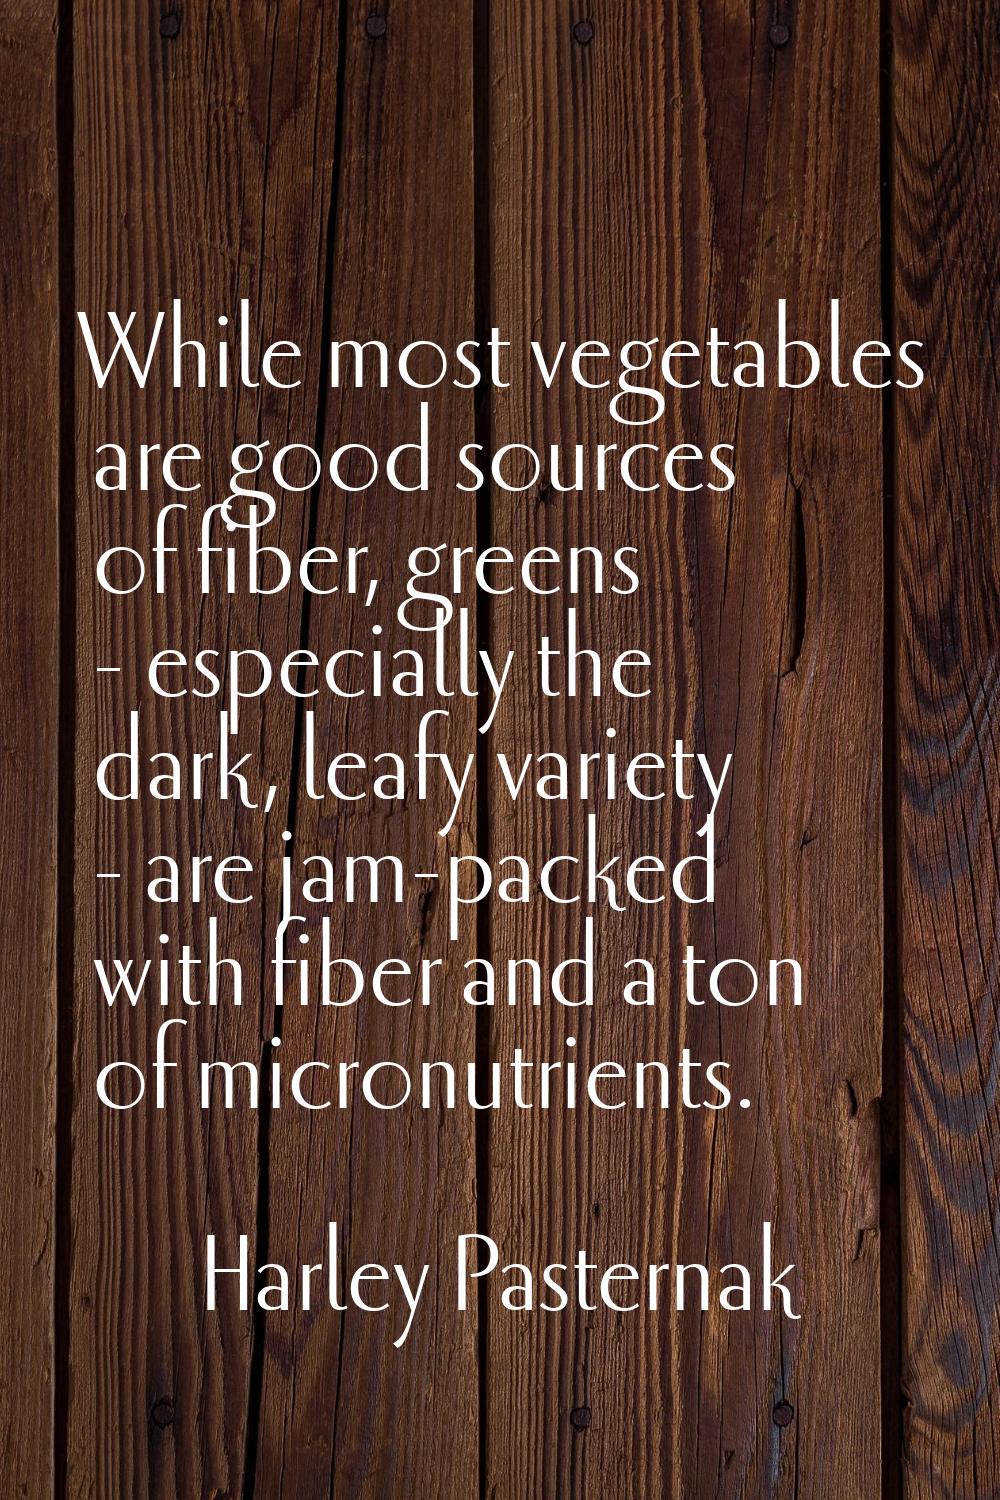 While most vegetables are good sources of fiber, greens - especially the dark, leafy variety - are 